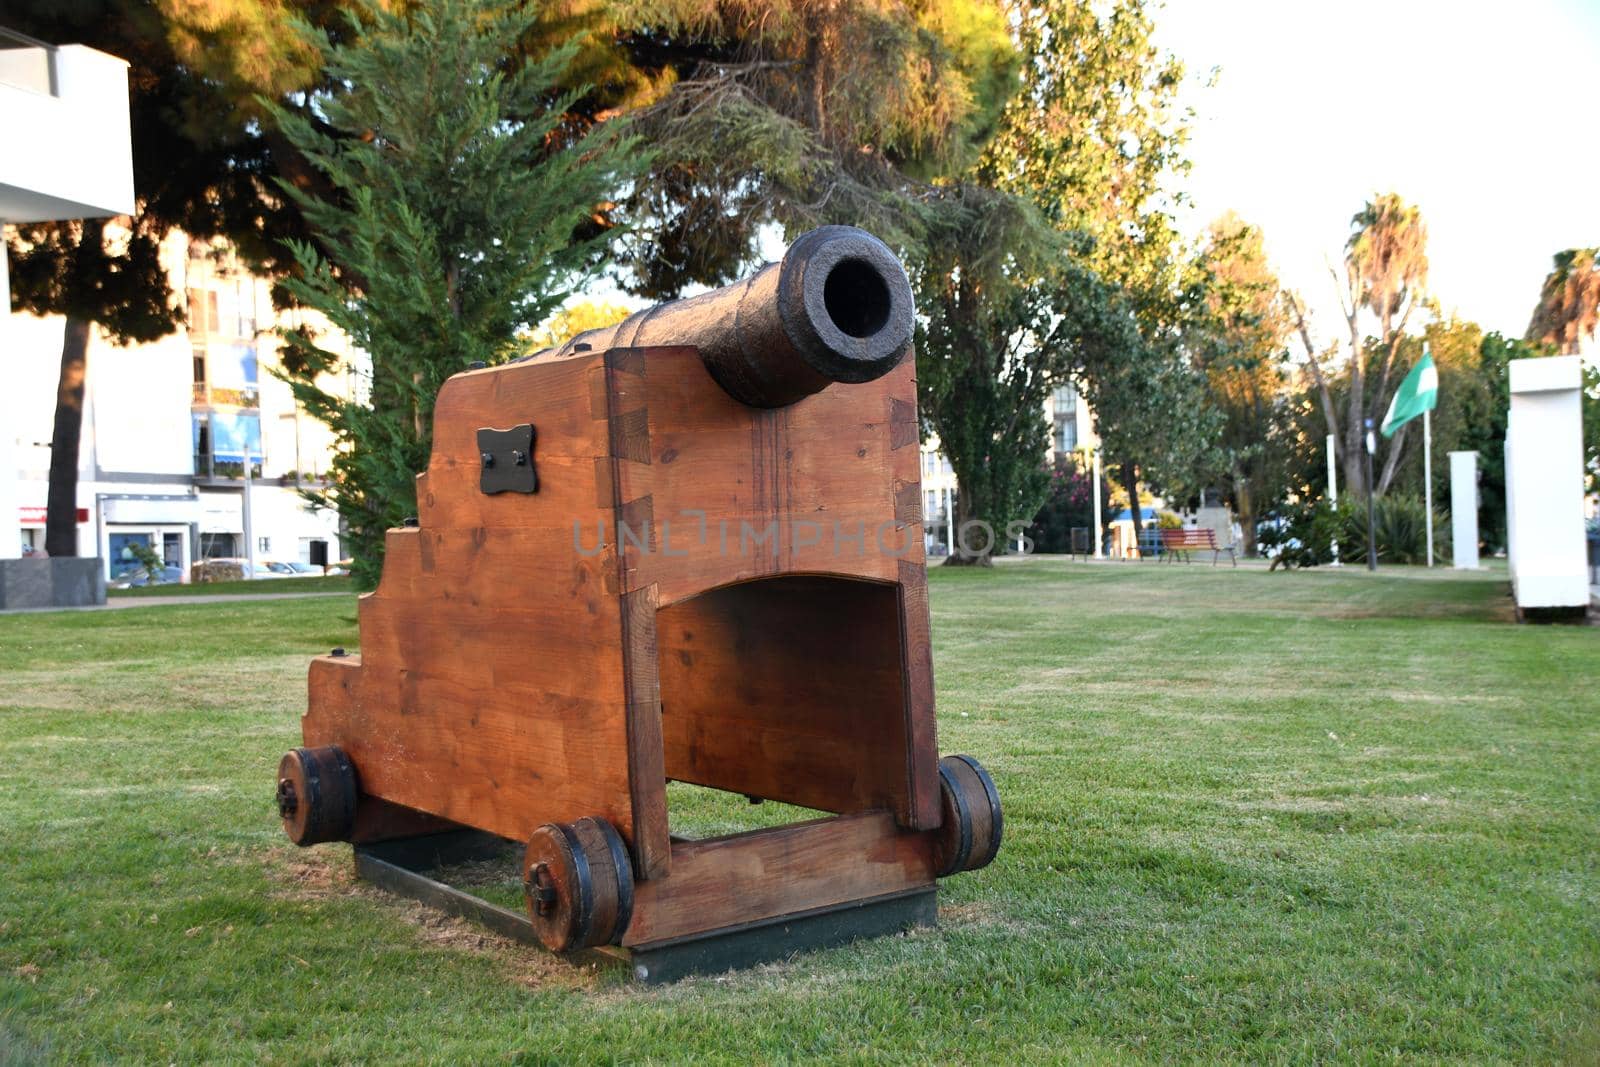 Old war cannon from a ship now resting in a garden